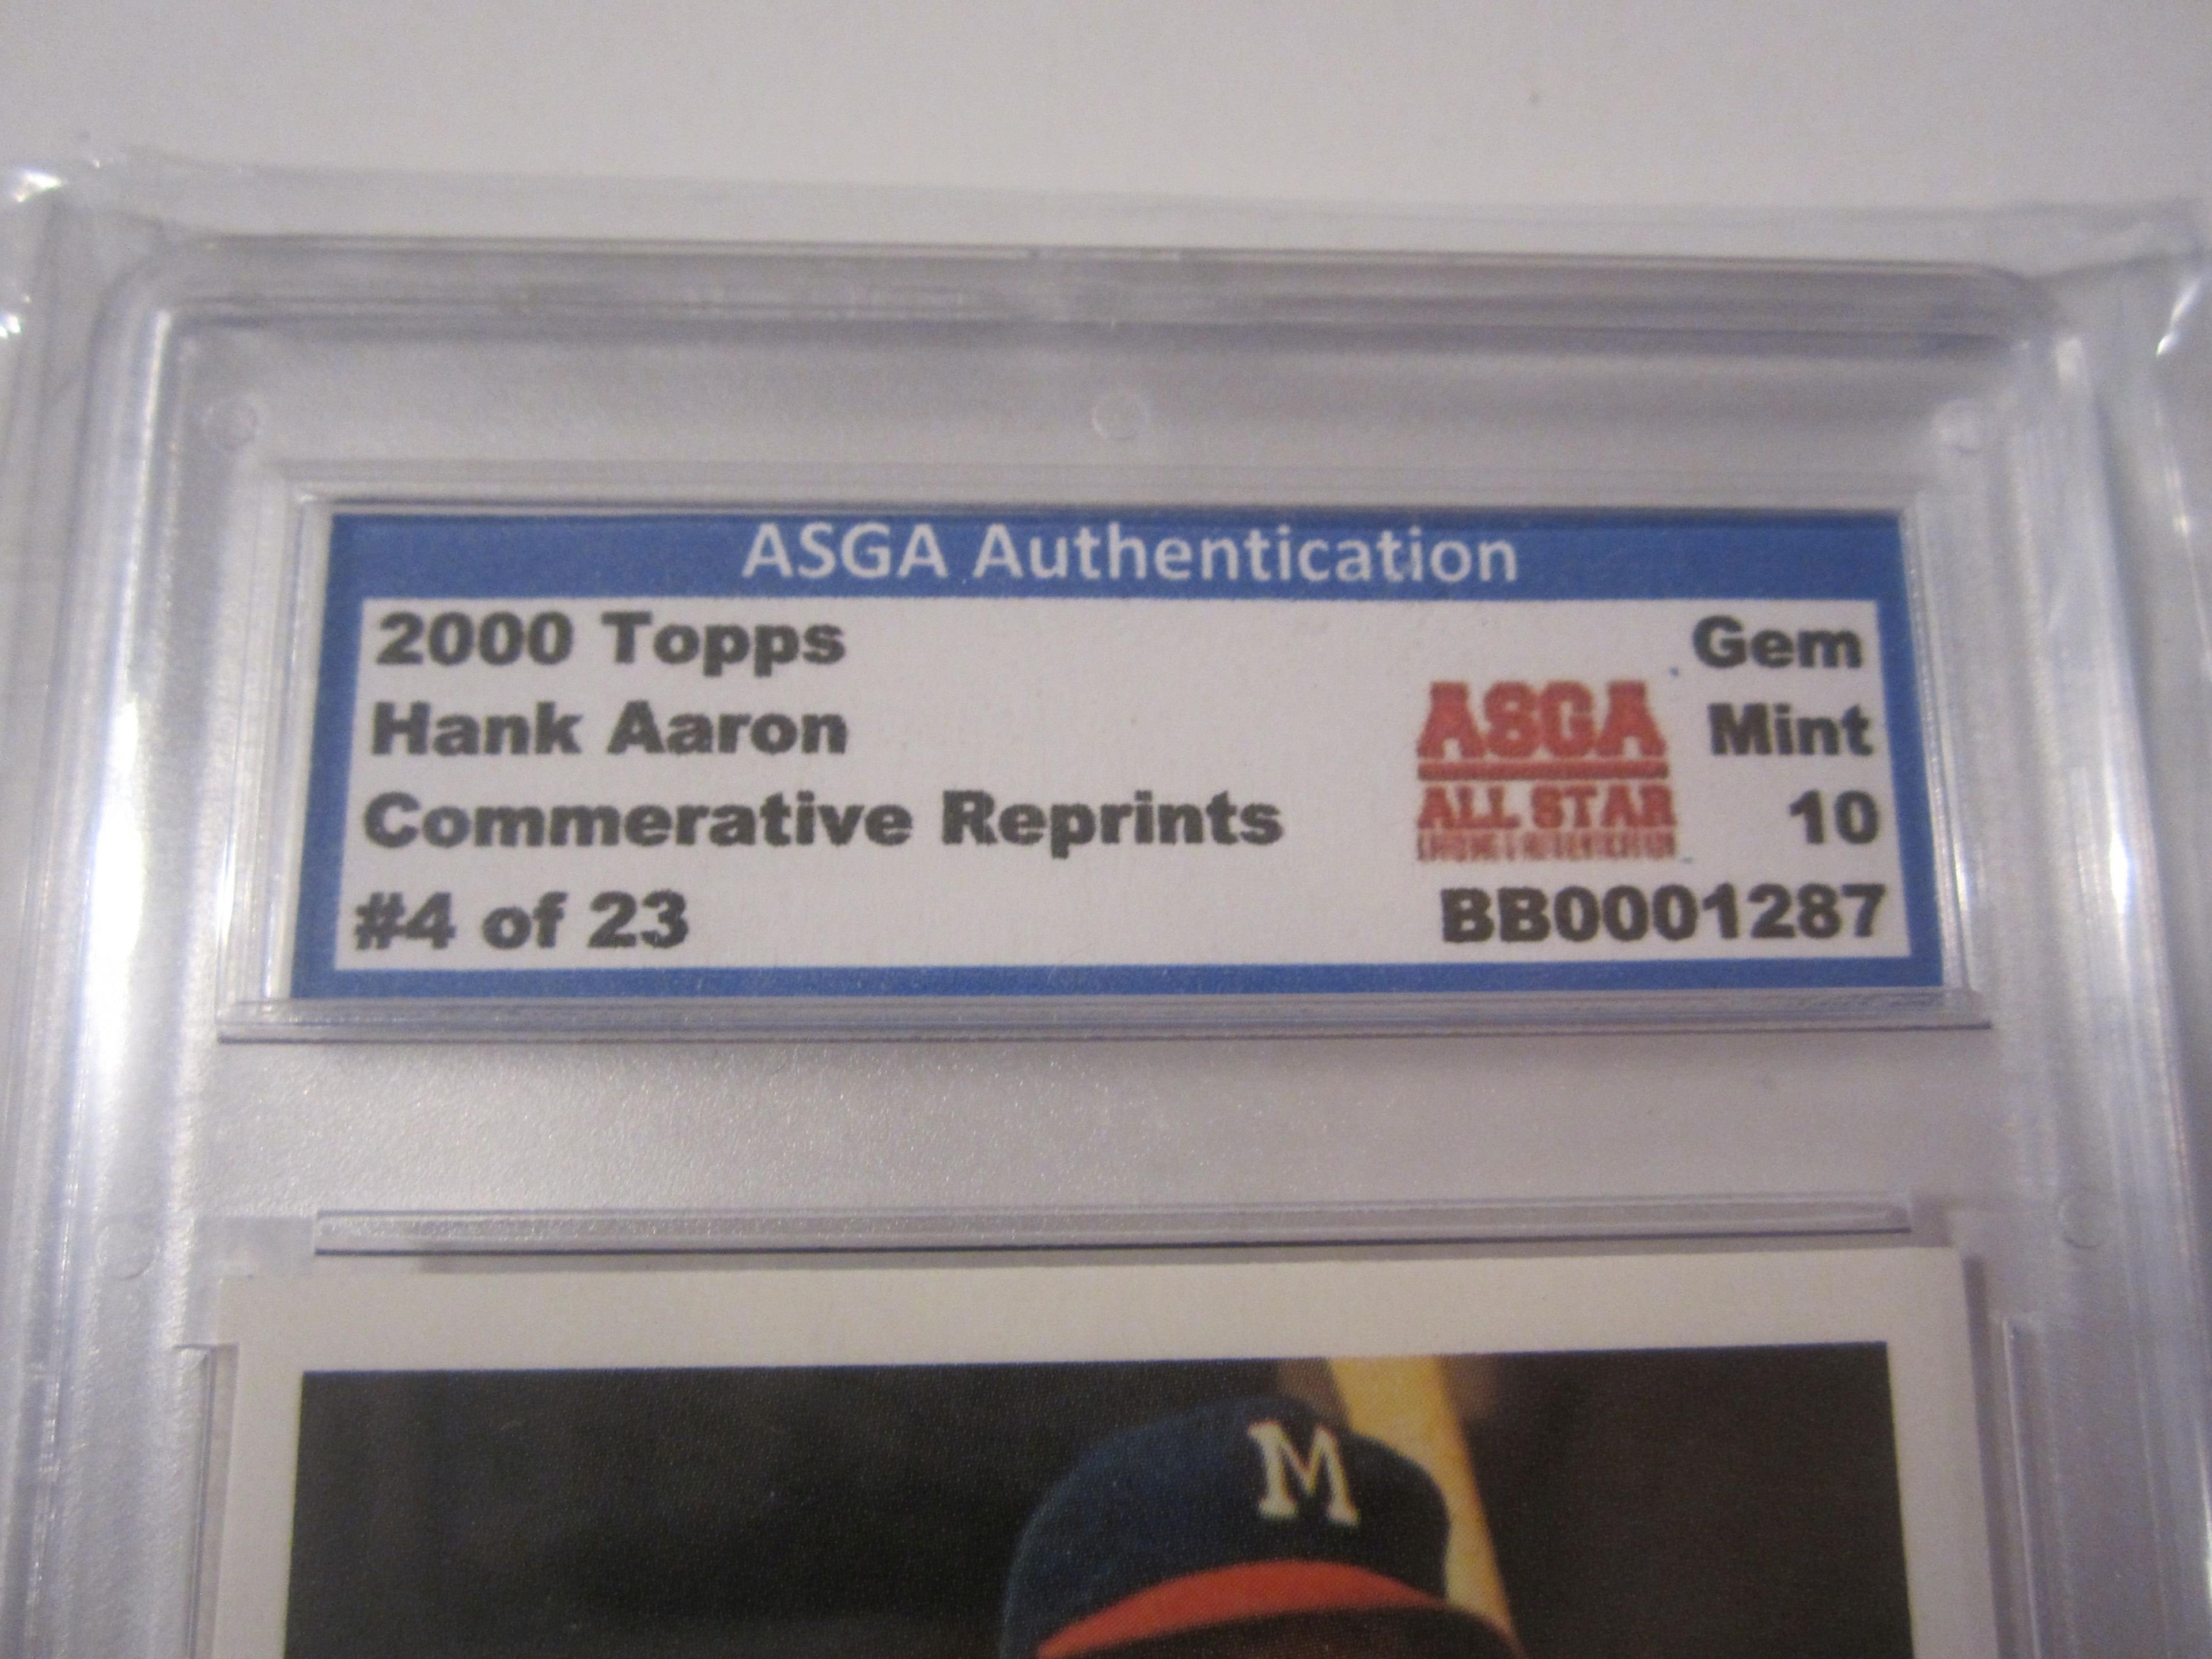 2000 Topps Hank Aaron Braves Commerative Reprints 4 of 23 Card Gem Mint 10